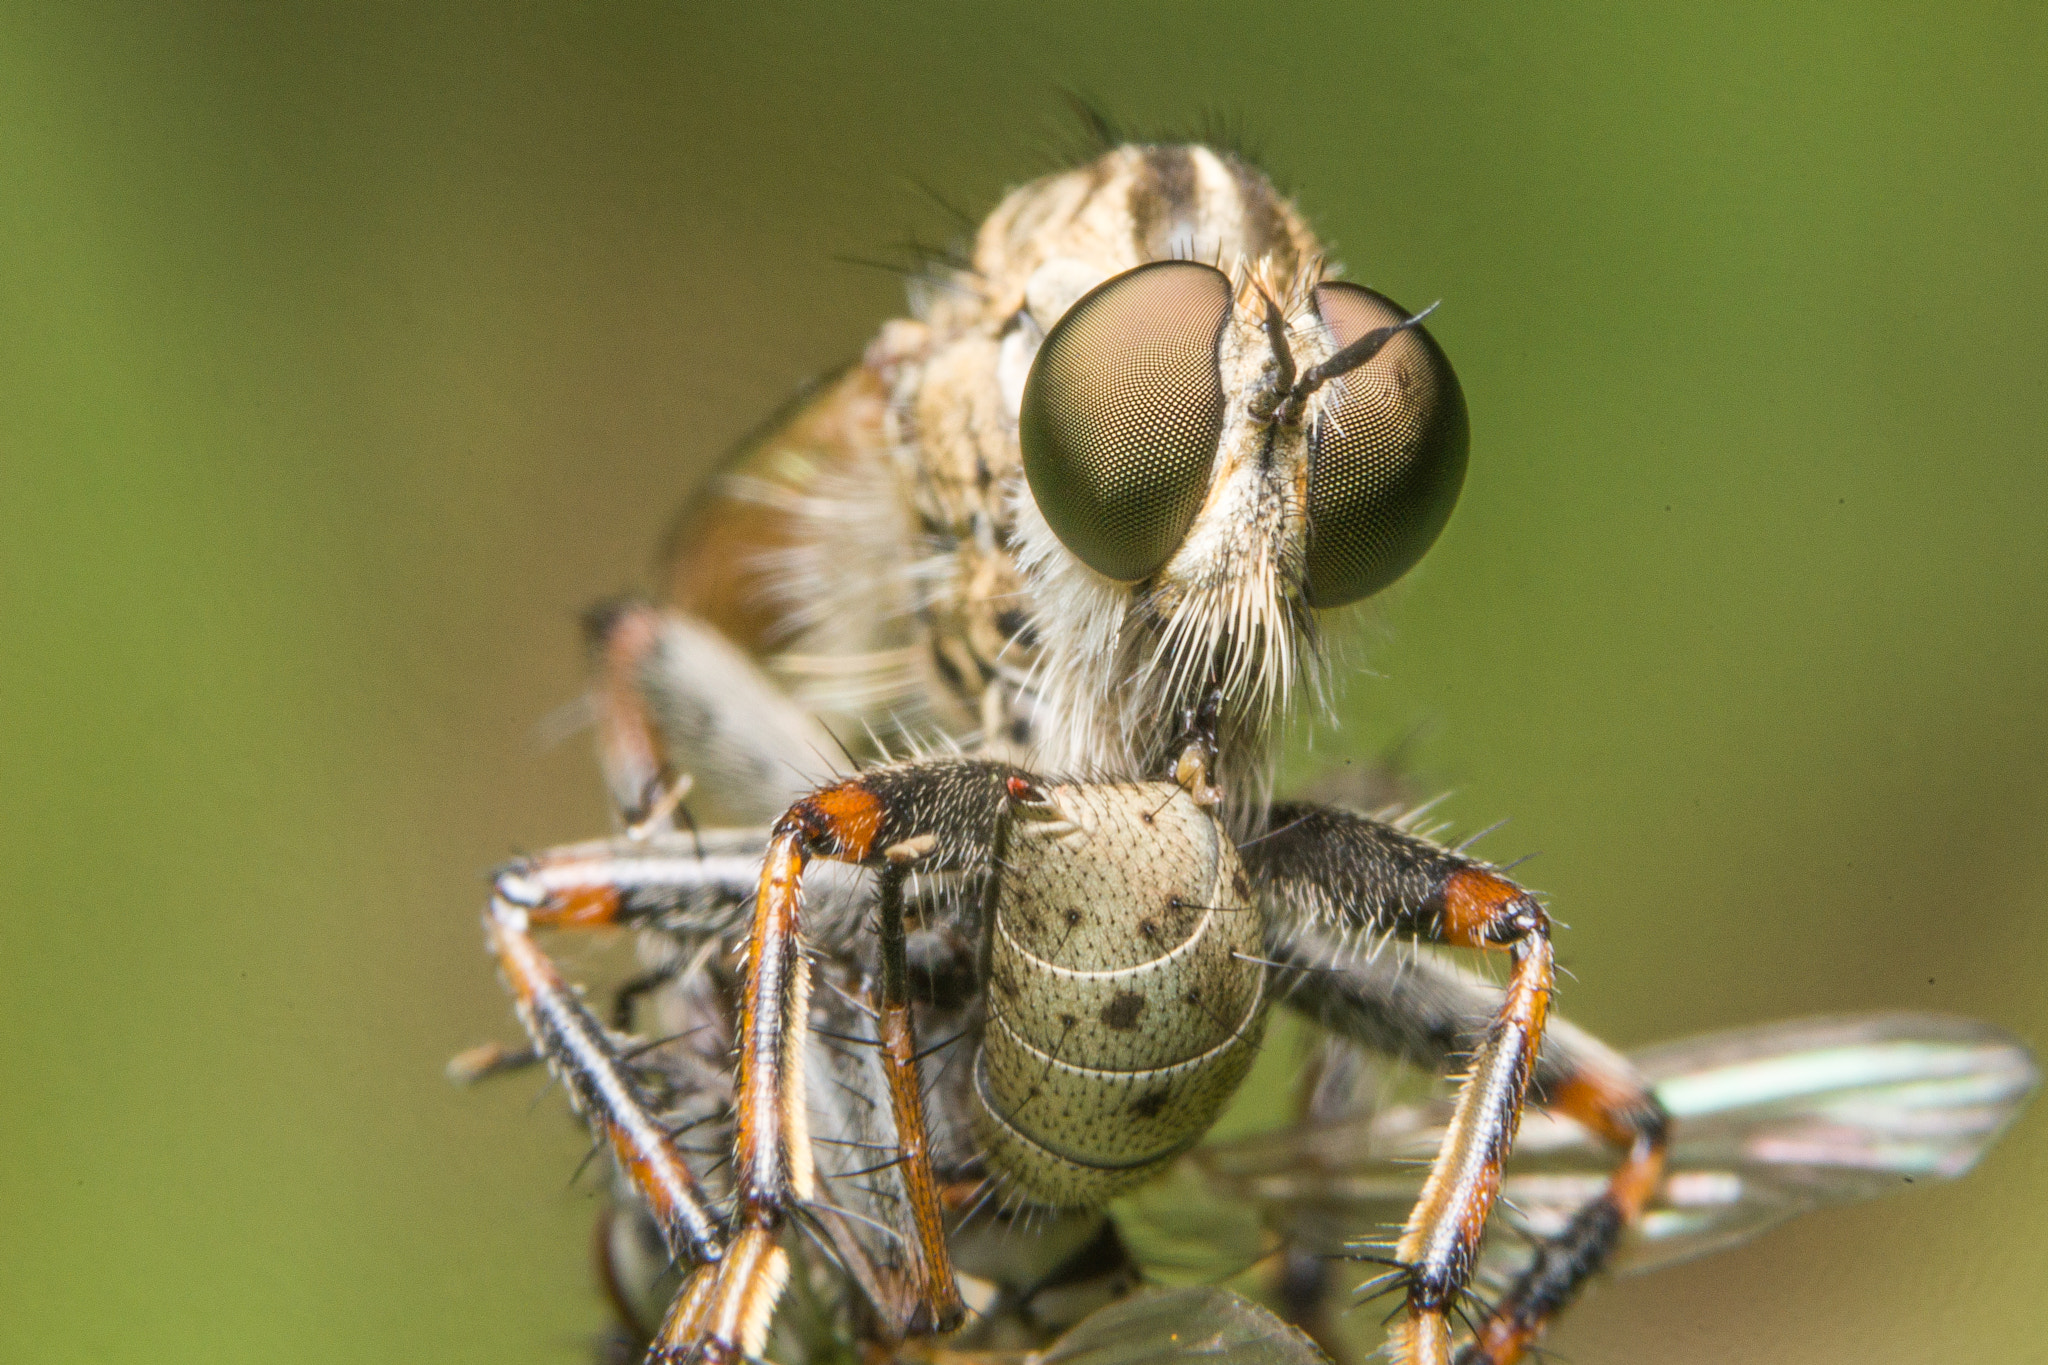 Sony a99 II sample photo. Robber fly photography